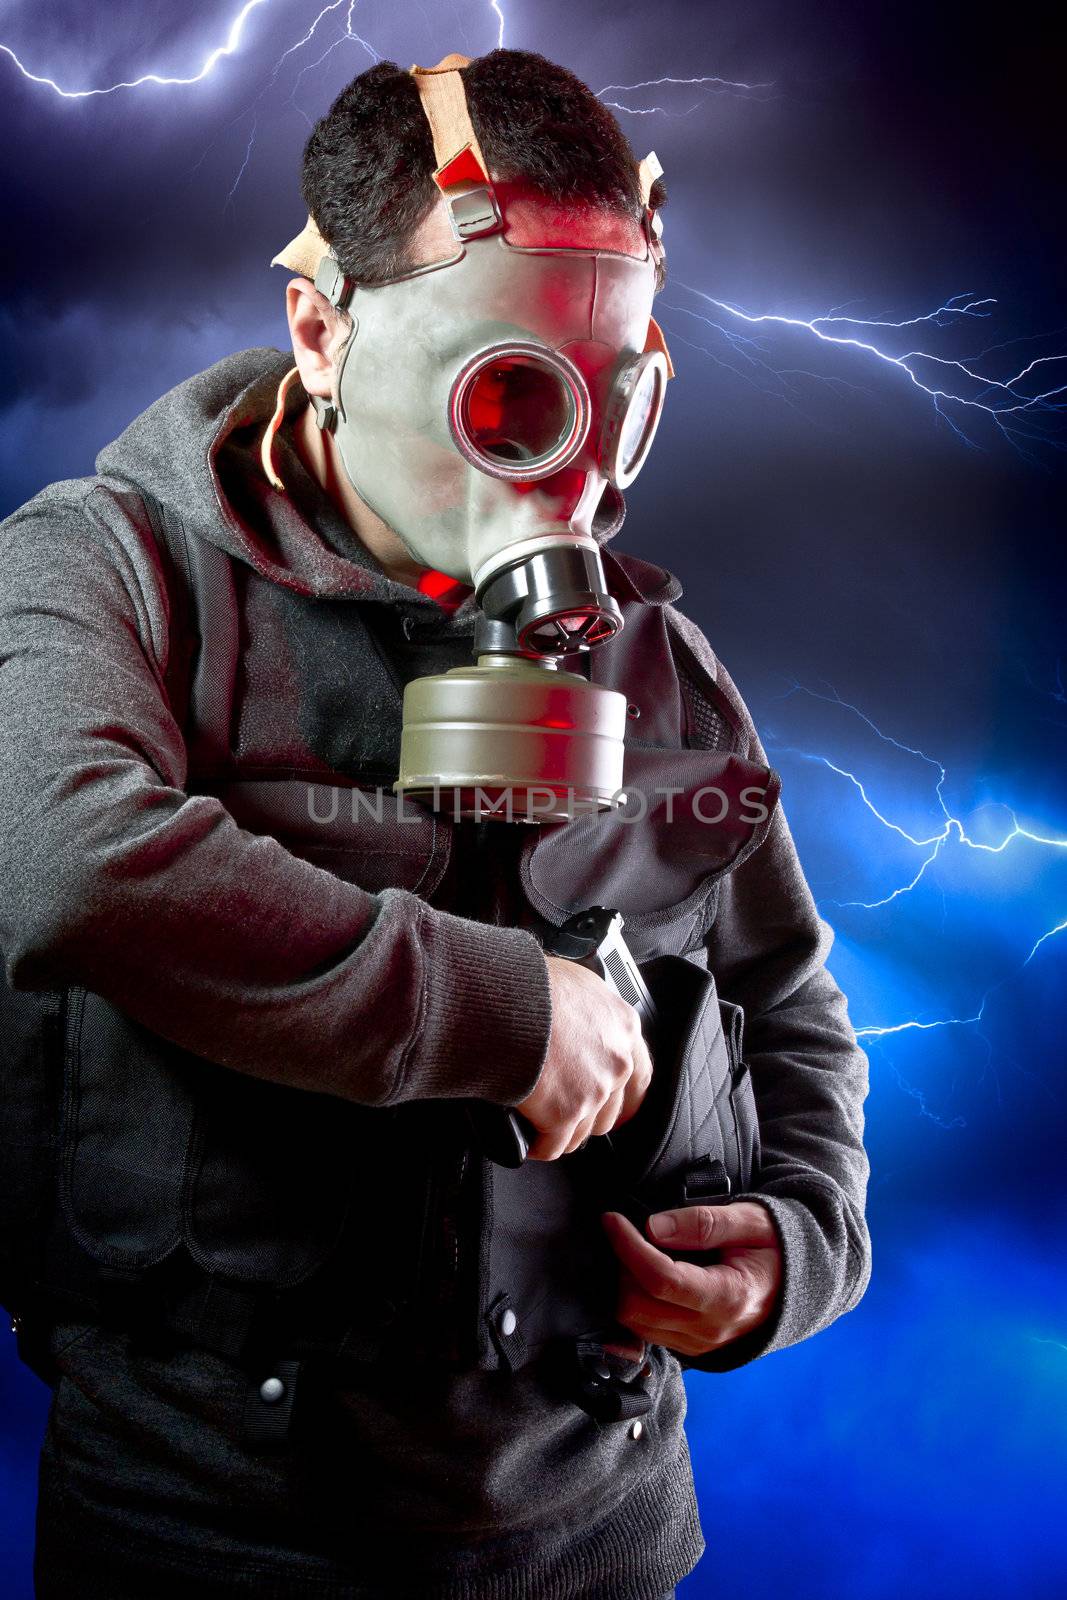 Man with long leather jacket and assault rifle over storm background